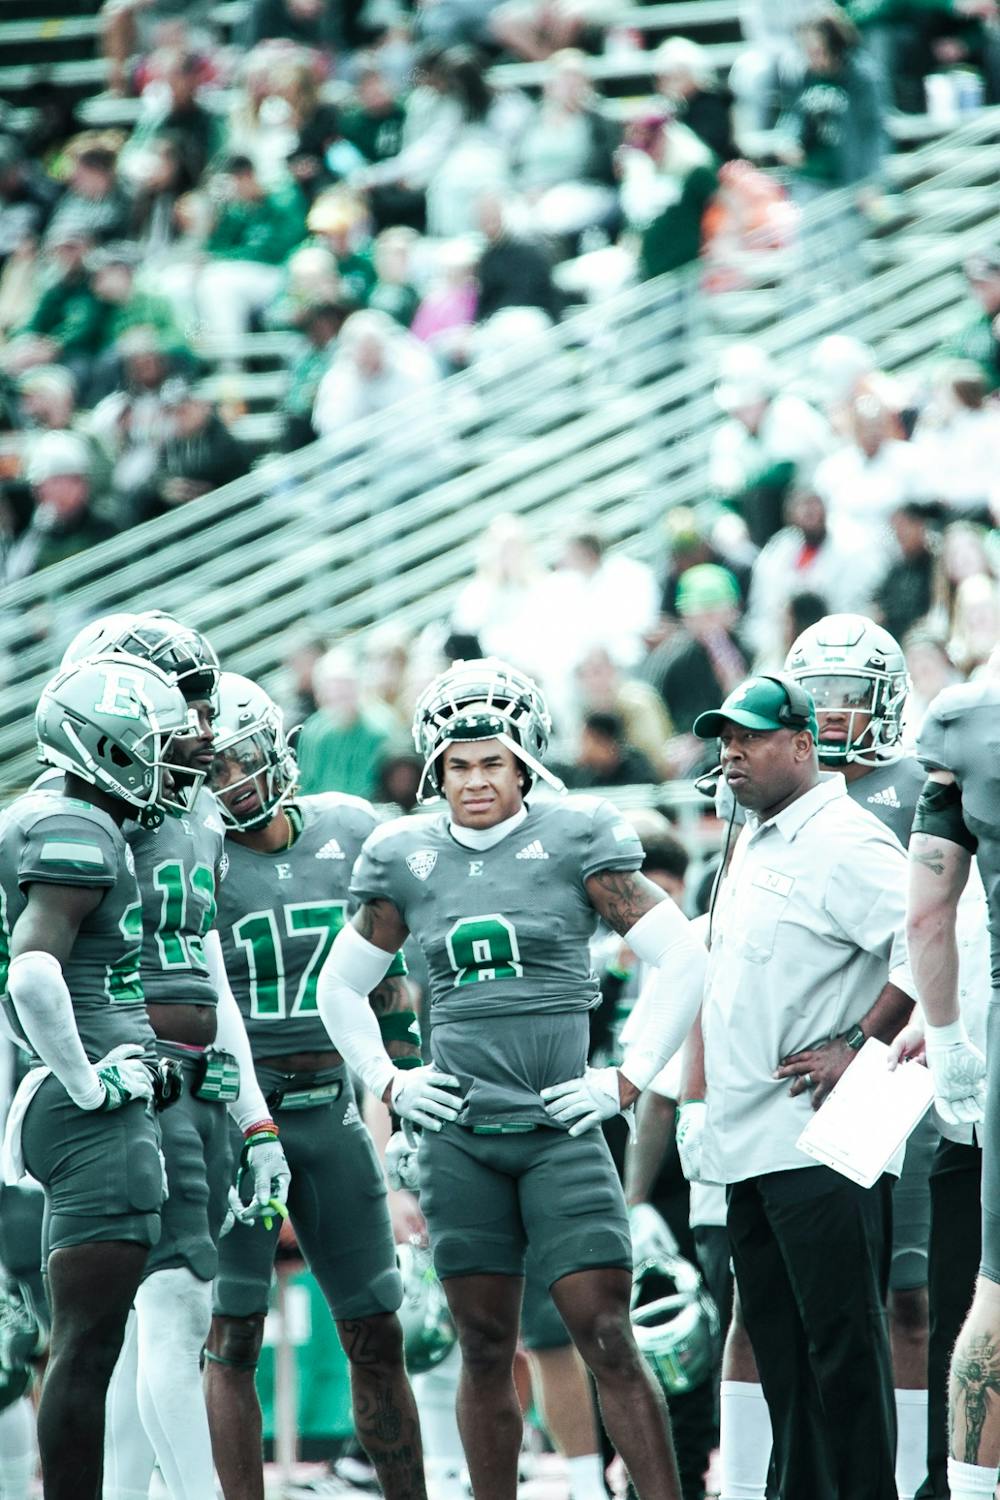 Eagles soar back in second half; EMU football defeats UMass 20-13 for homecoming win